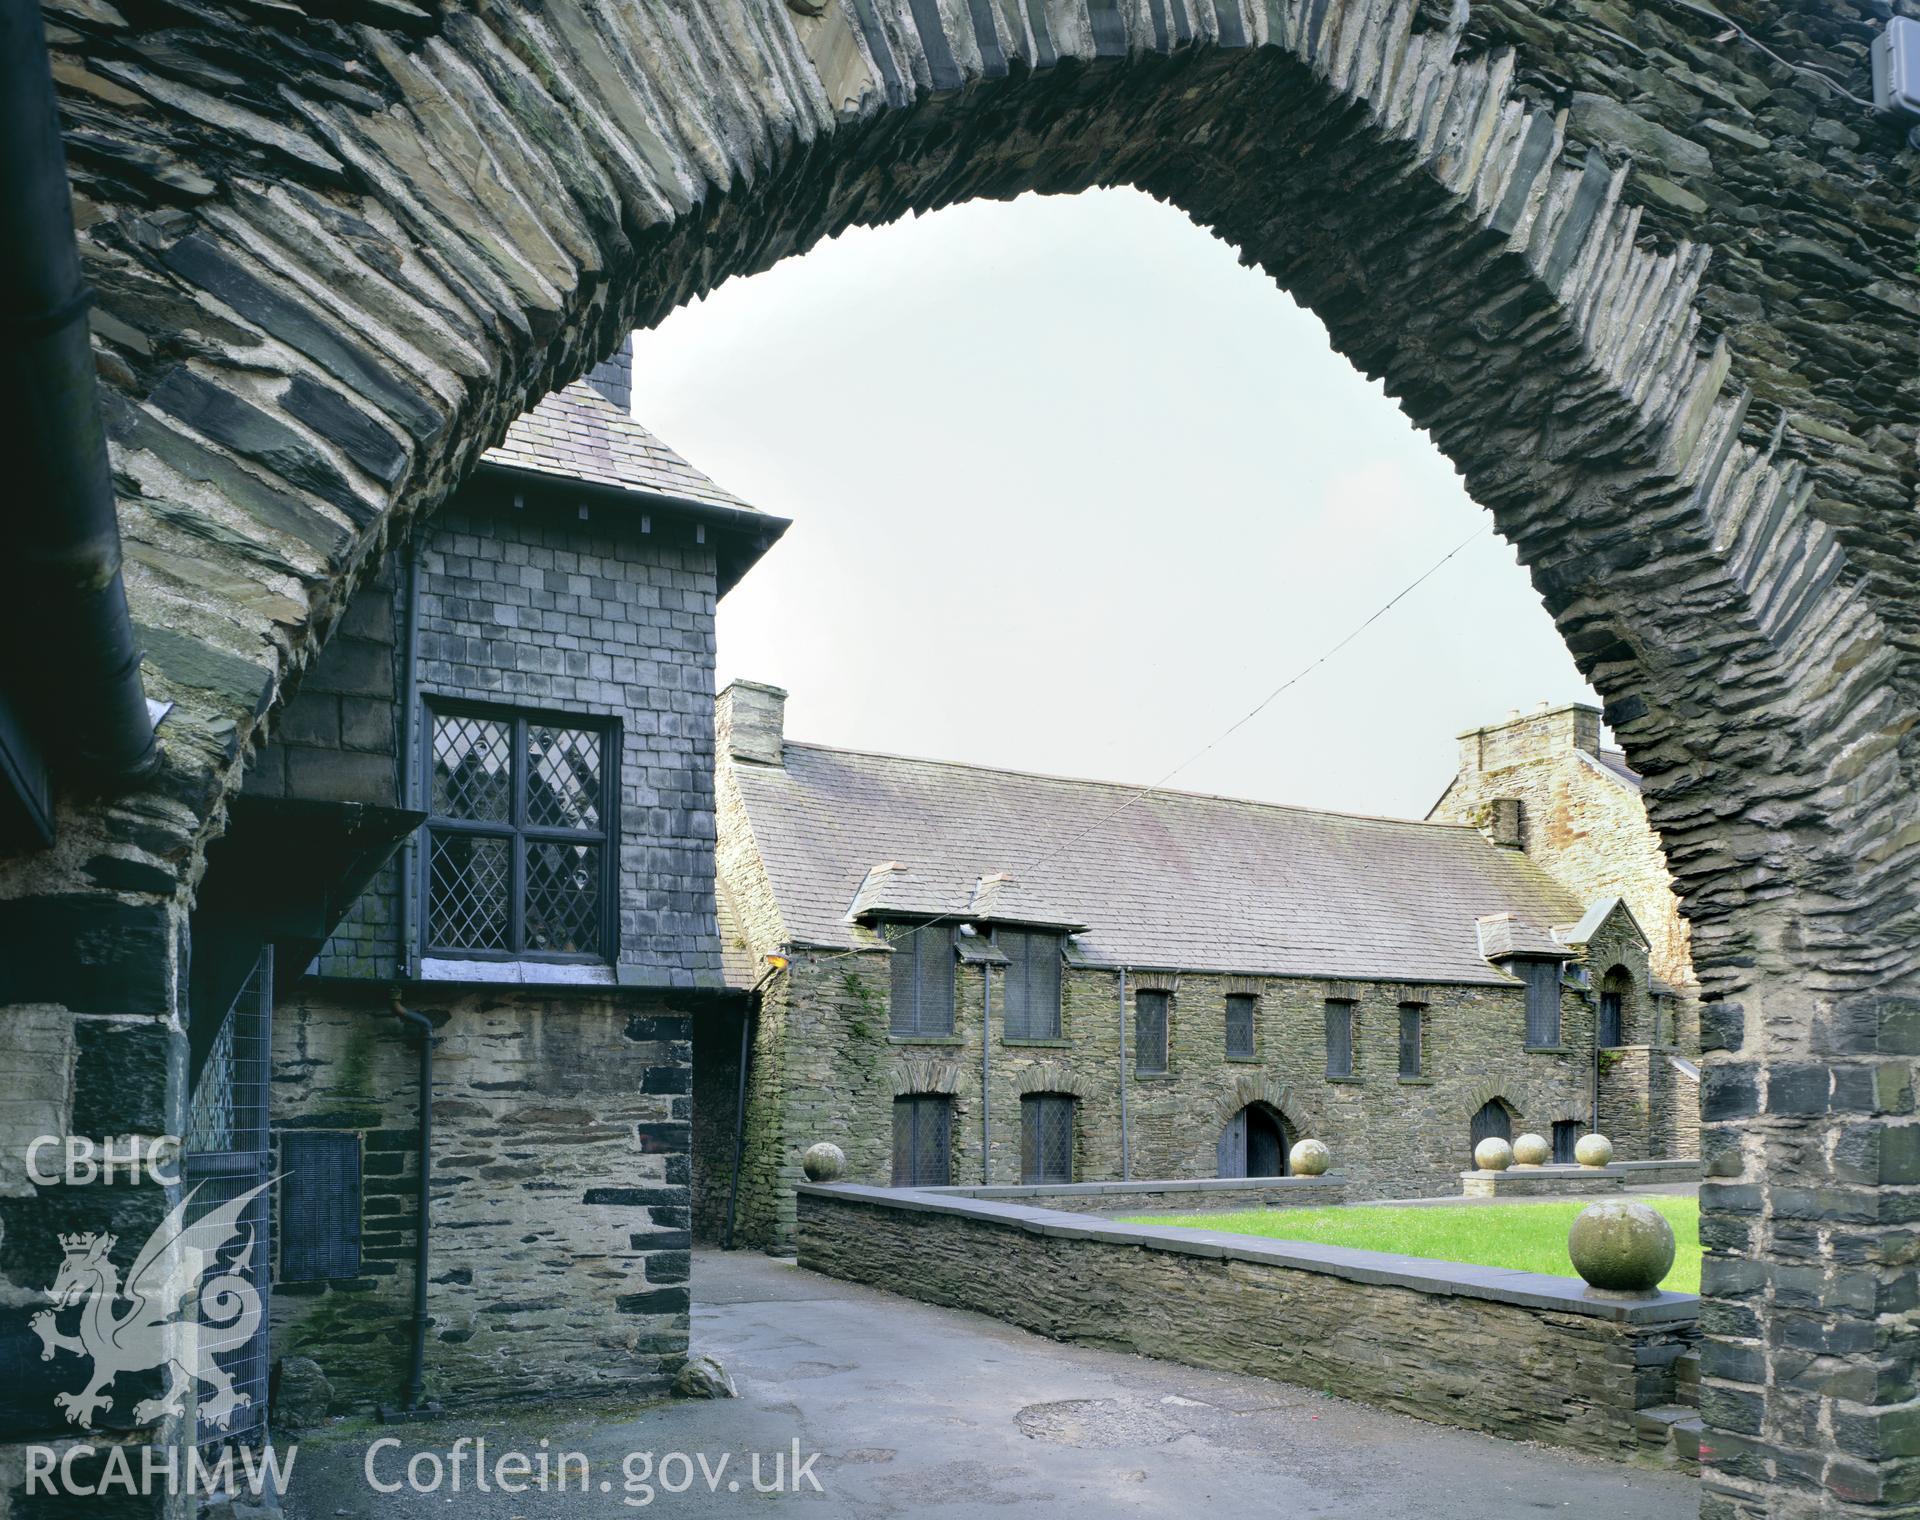 Colour transparency showing  landscape view of Parliament House, Machynlleth, produced by Iain Wright 2004